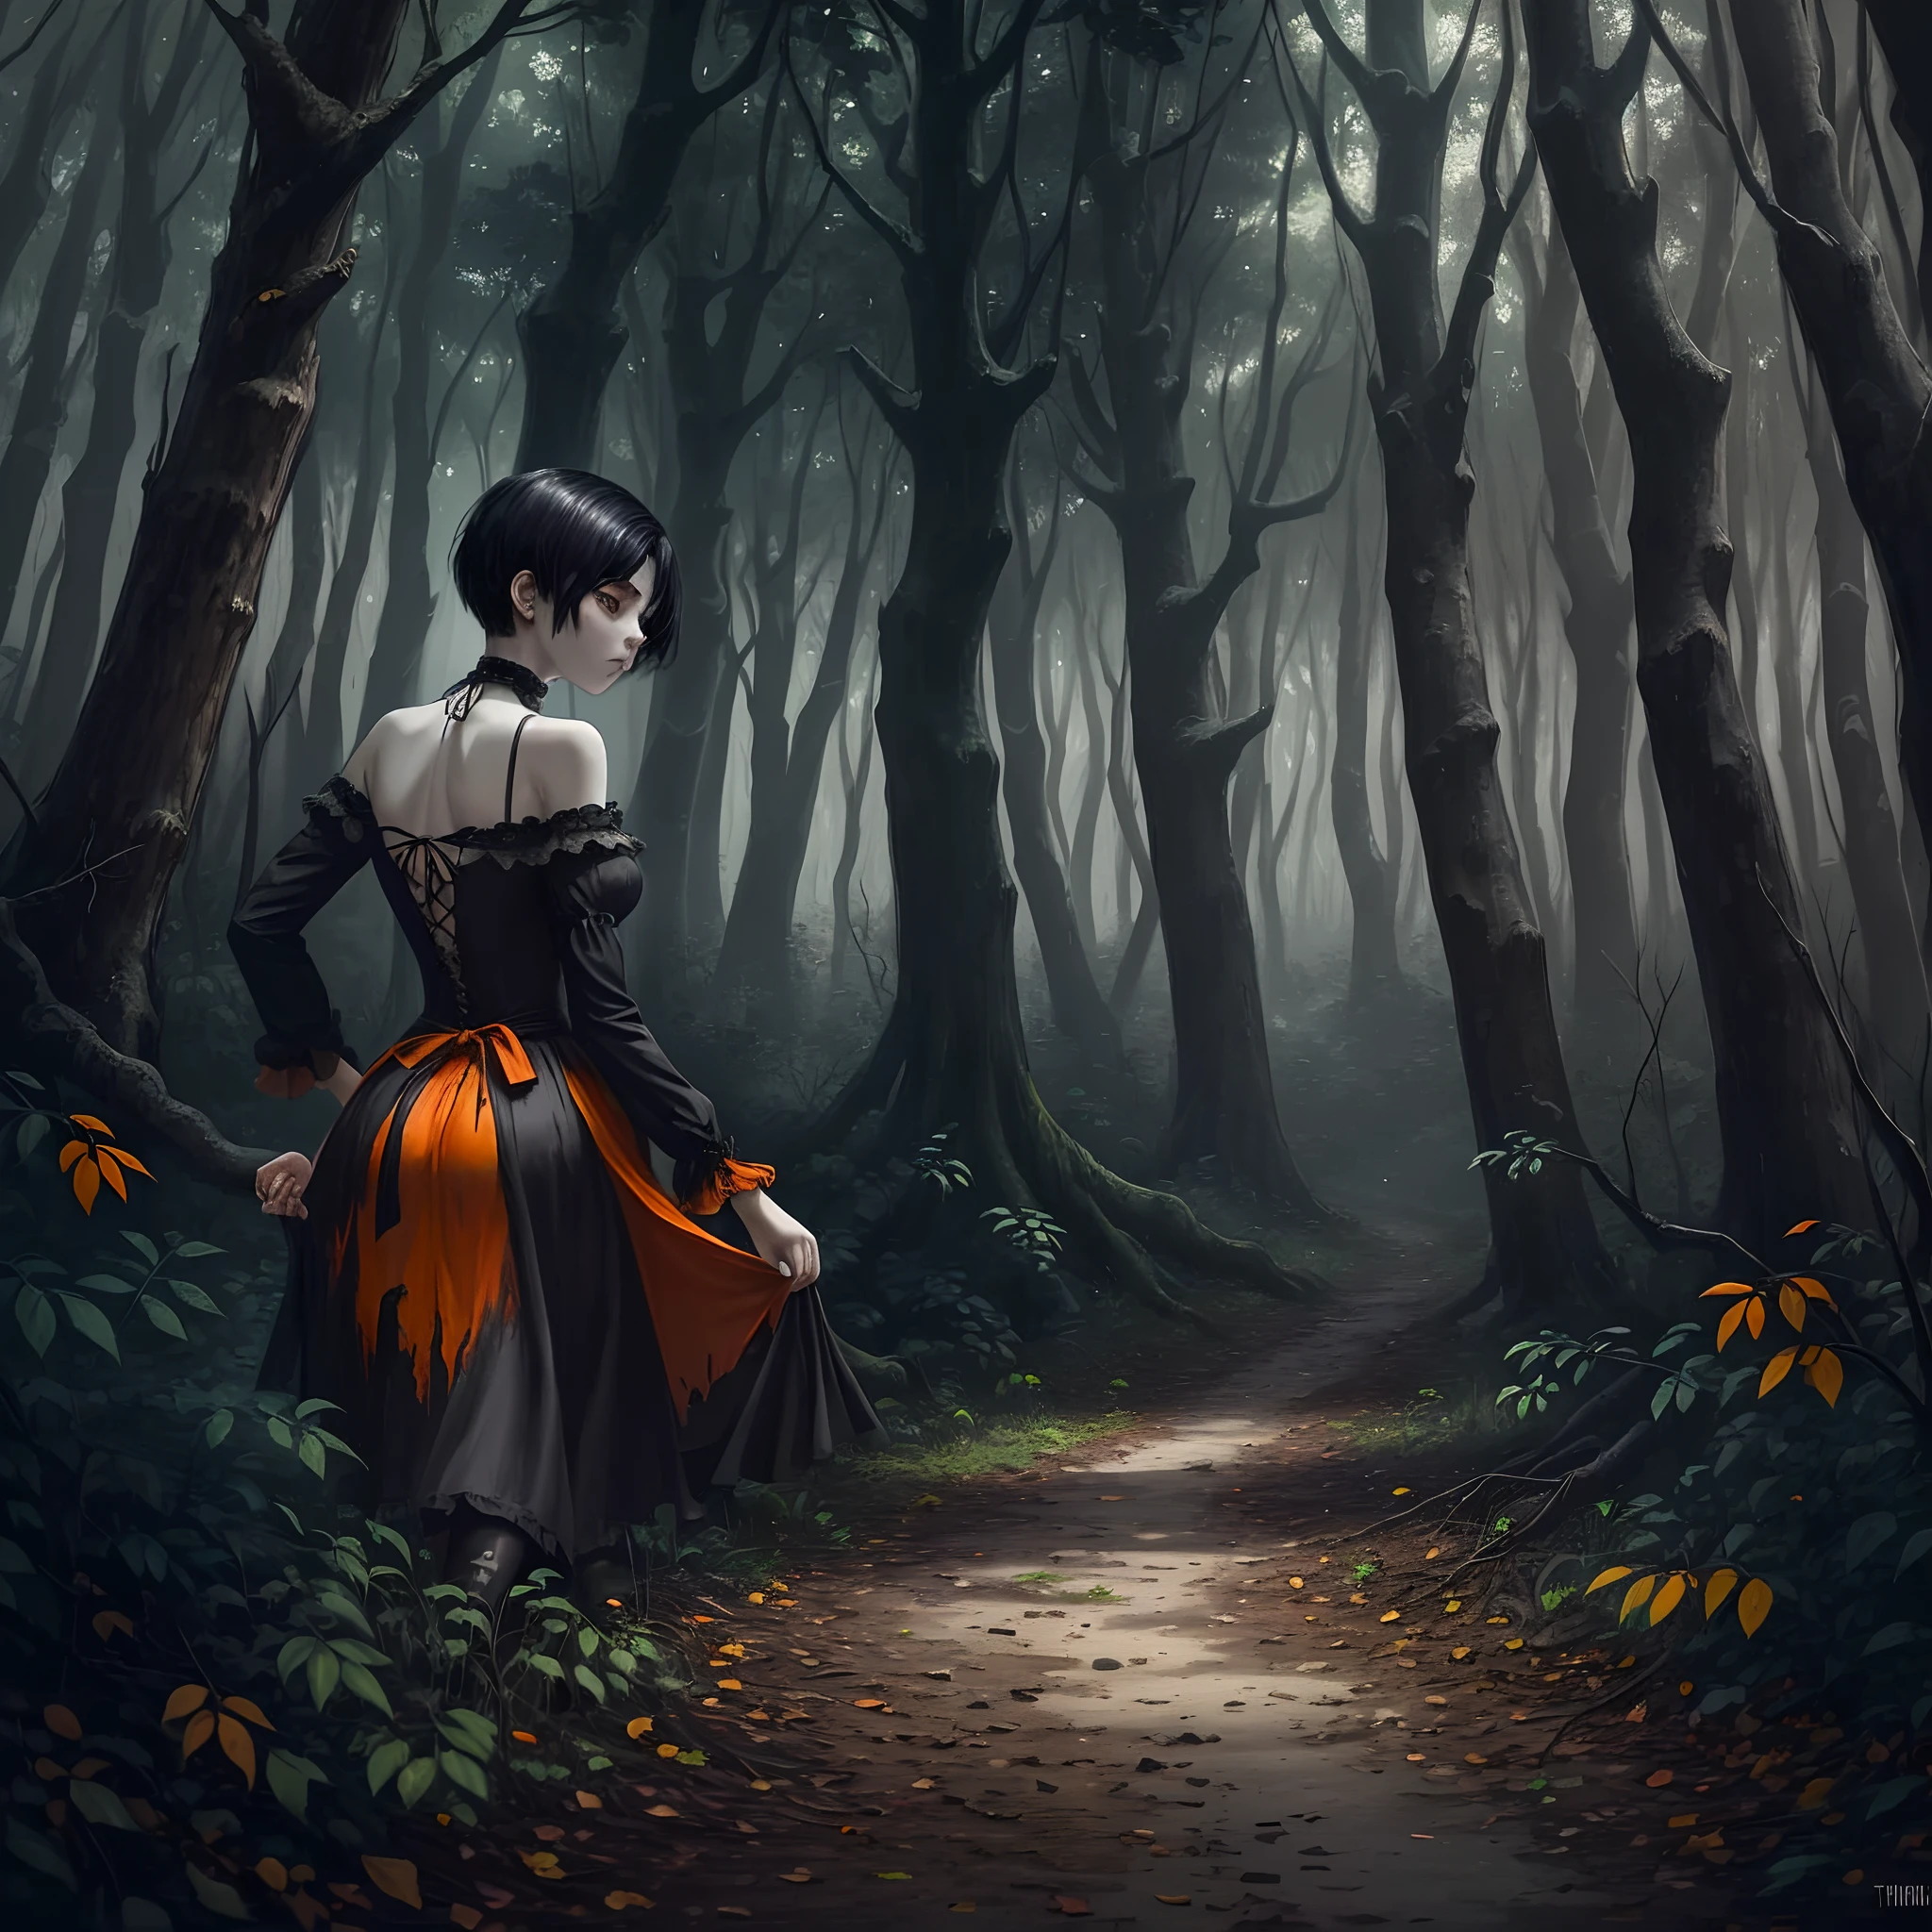 1 Girl with short black hair, pale gray skin in an orange dress in the woods struggling to walk. The camera is behind her Dutch tilt angle, camera is tilted, we see her back. Big scary bended trees gothic trees bended branches warped twisted scenery, painted, oil painting style, gothic art, scary art, horror, sad, depressing, ugly scenery